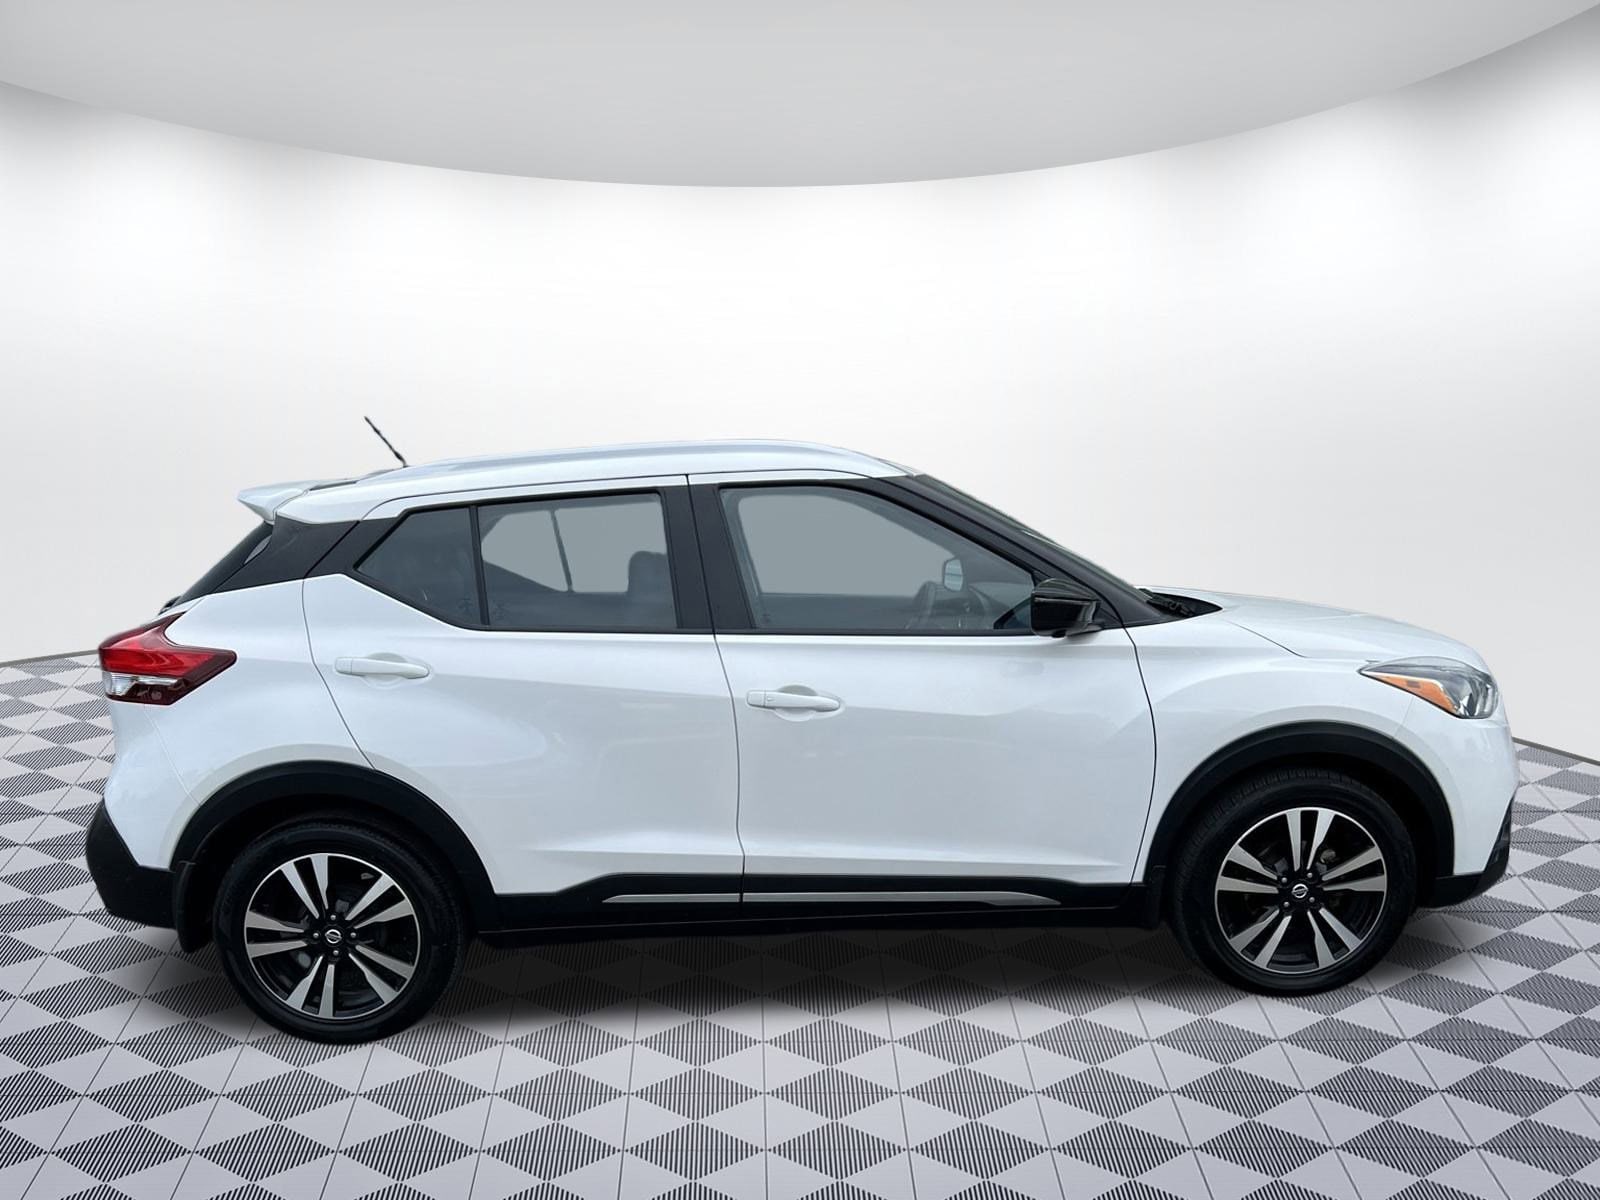 Used 2020 Nissan Kicks SR with VIN 3N1CP5DV6LL542709 for sale in Bellingham, WA